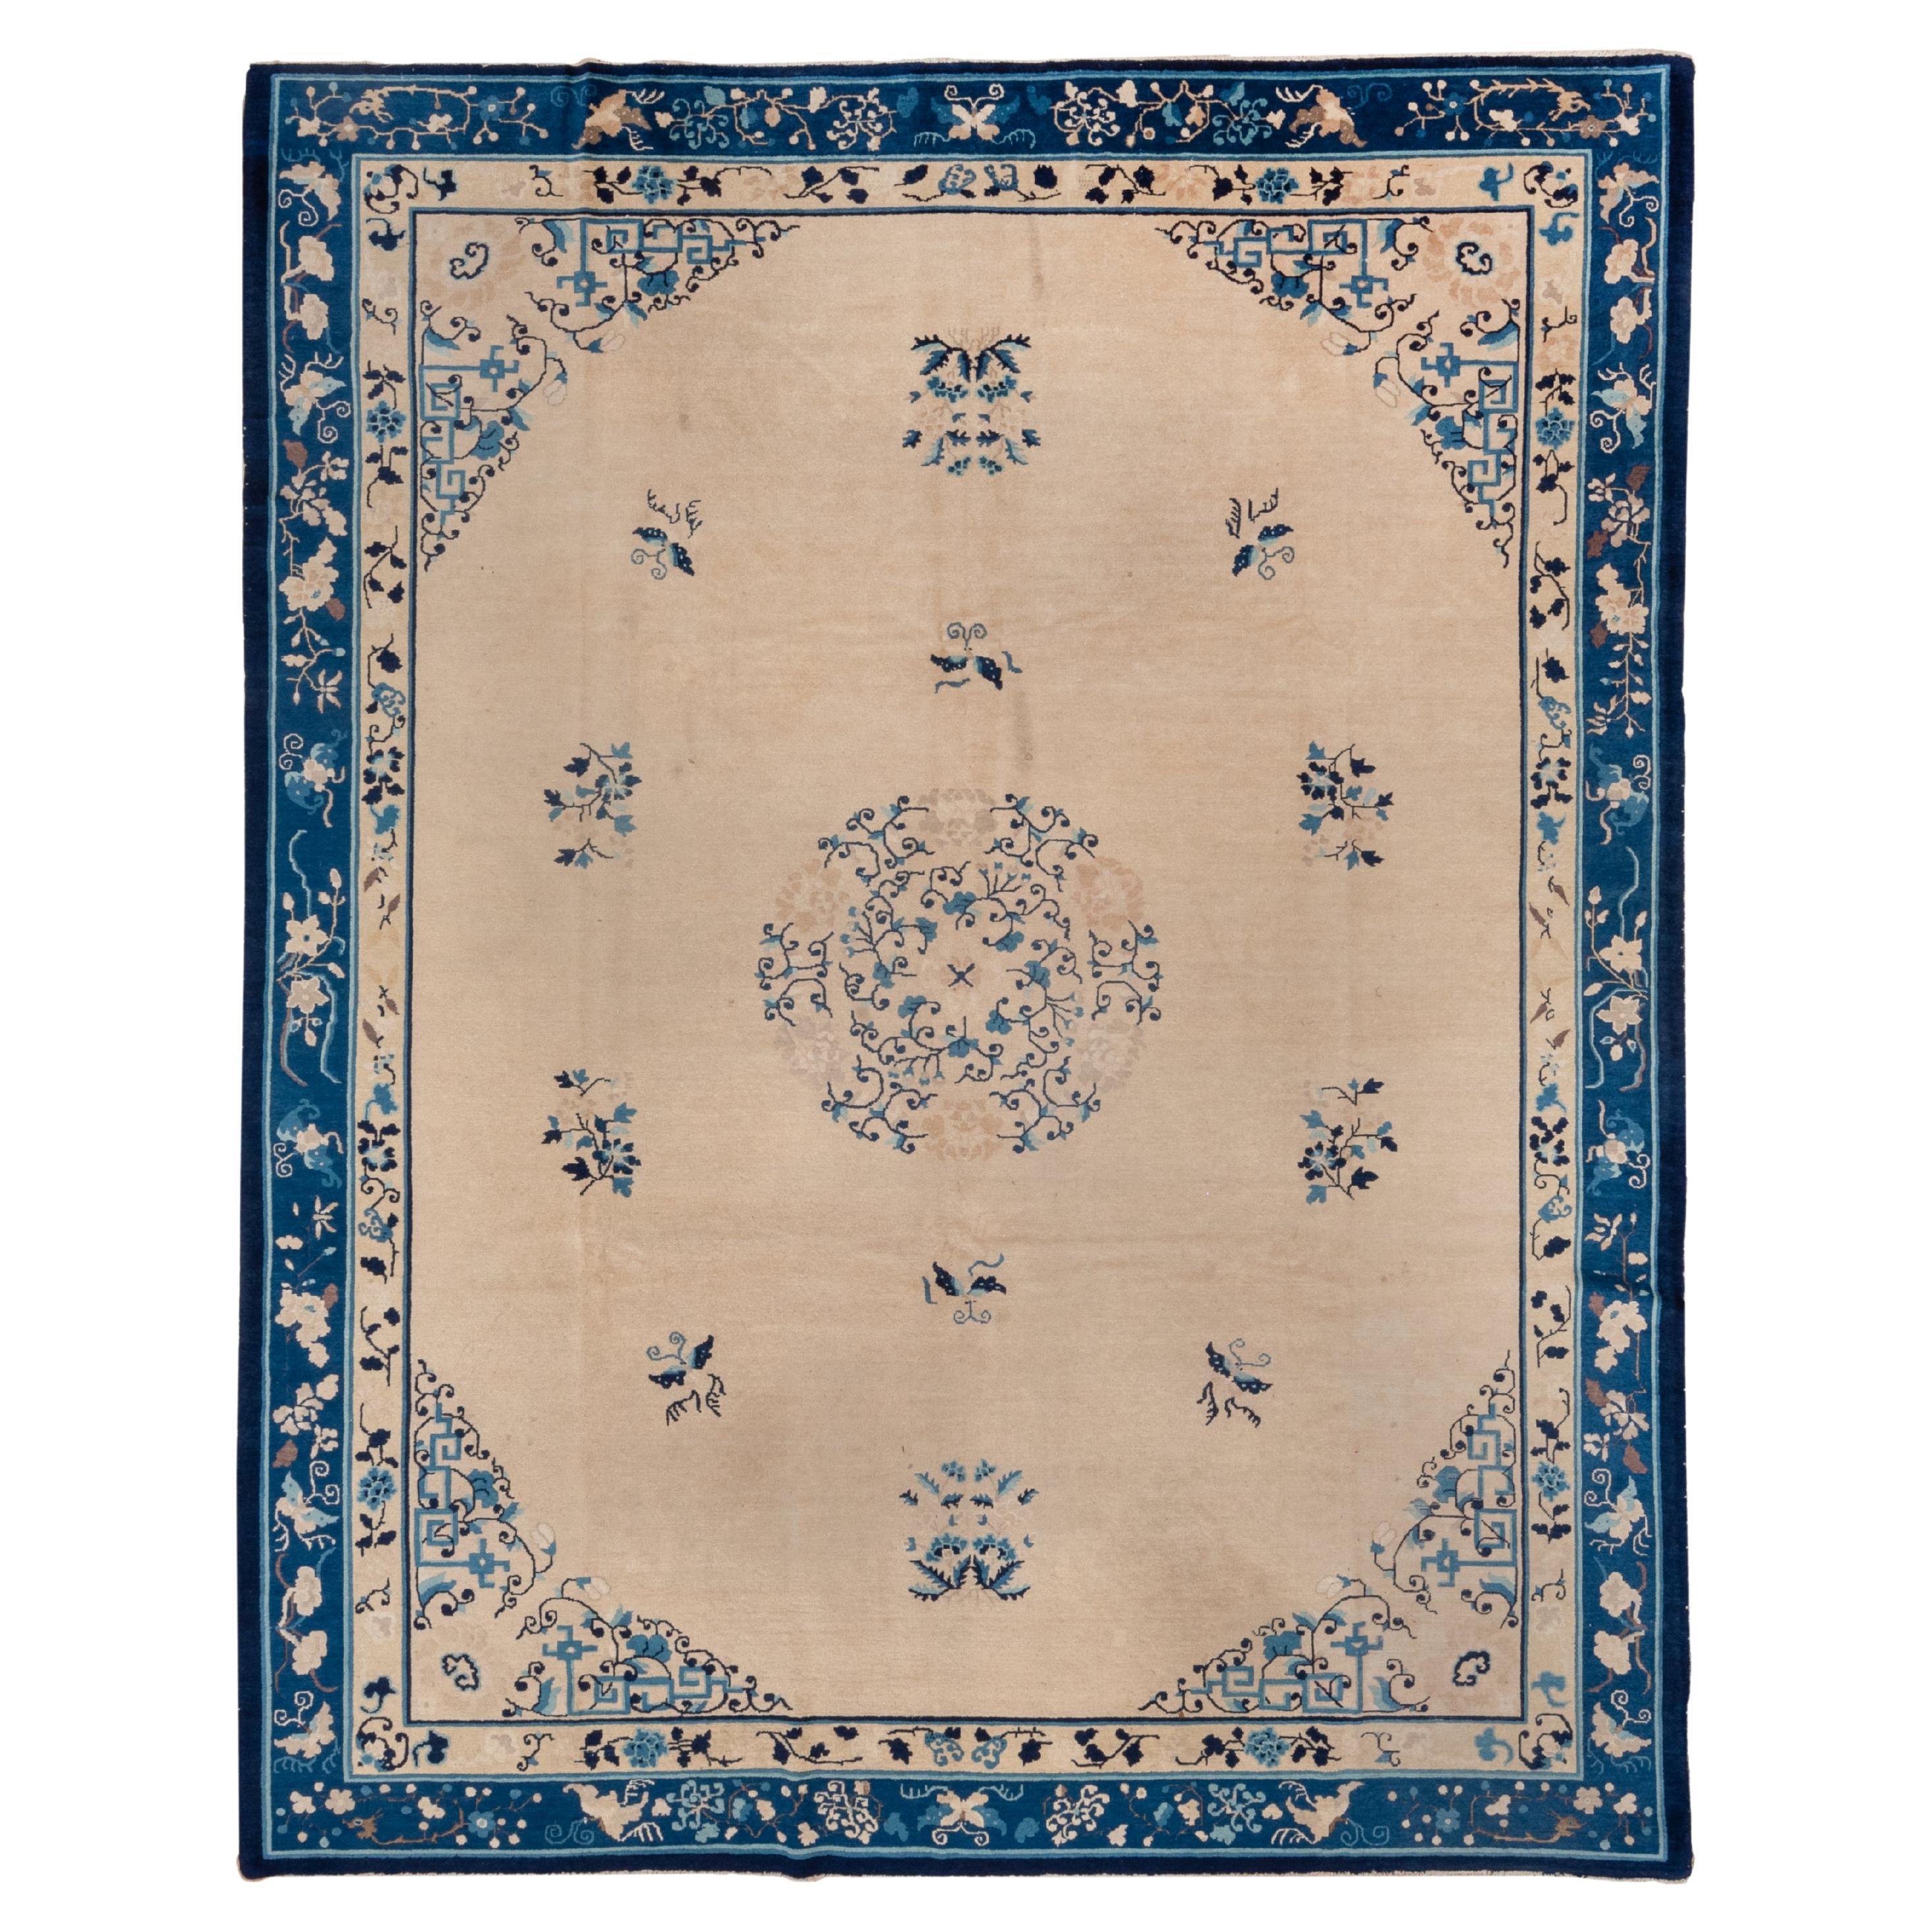 Classic Blue and White Antique Chinese Rug